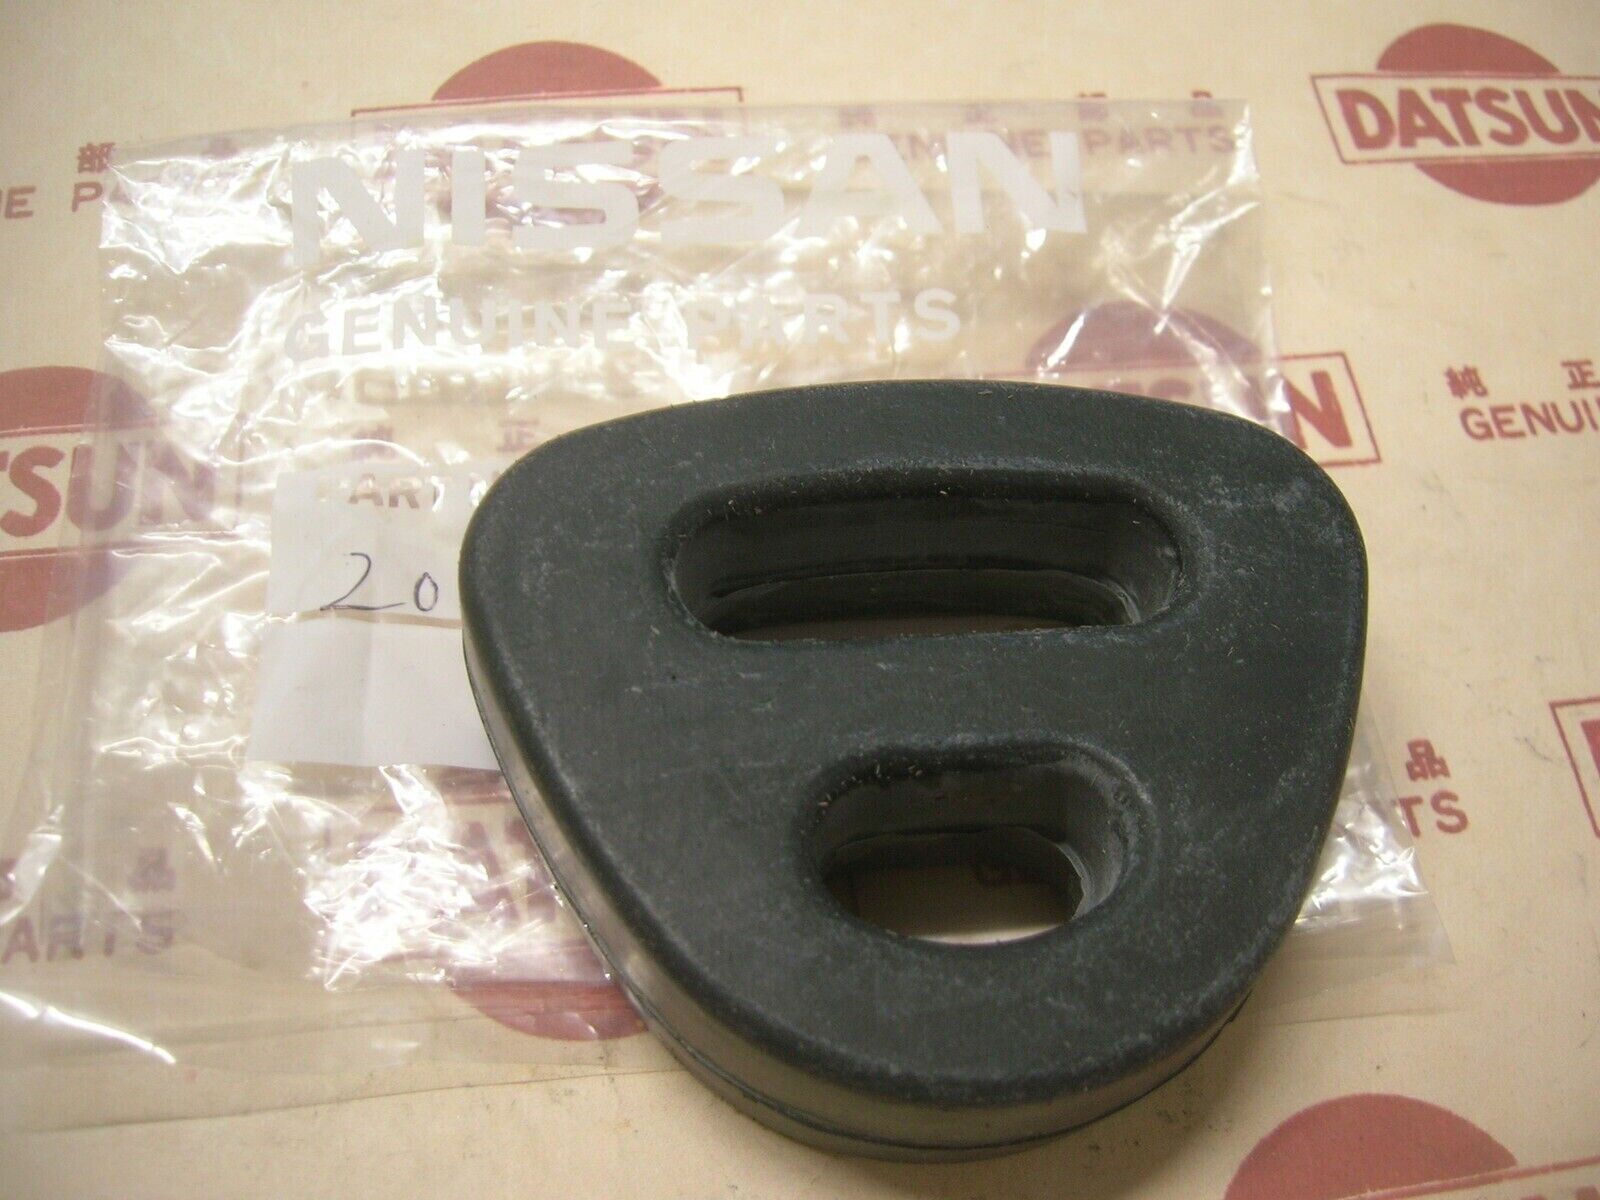 DATSUN 510 Exhaust Tube Mounting Rubber Genuine NOS (For NISSAN Bluebird 510)